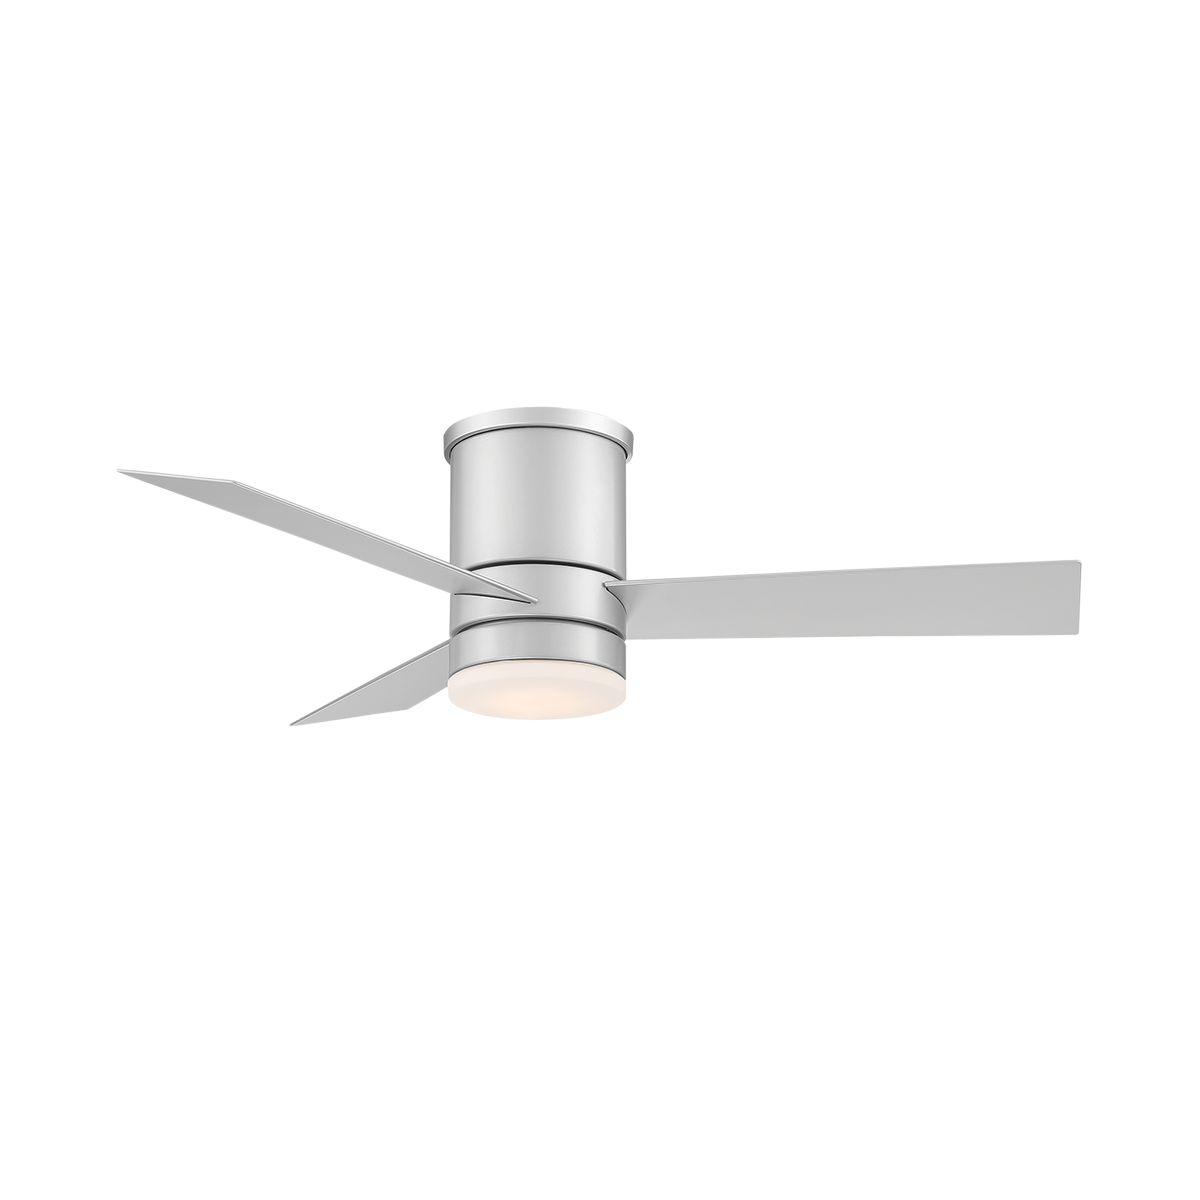 Axis Flush 44 Inch Low Profile Outdoor Smart Ceiling Fan With 3500K LED And Remote